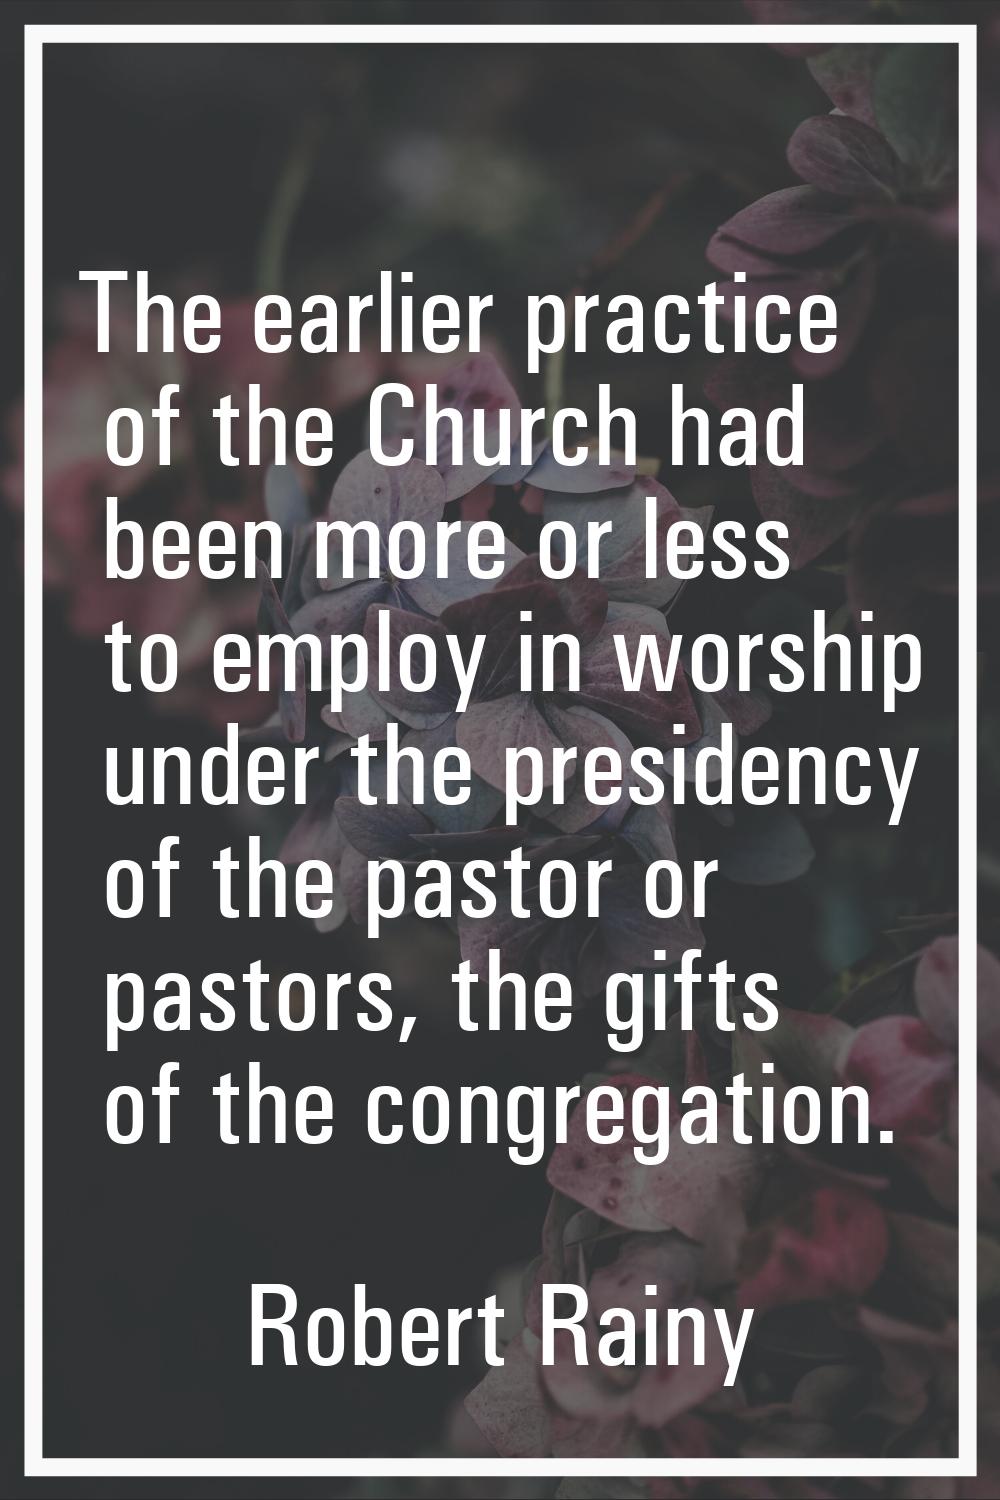 The earlier practice of the Church had been more or less to employ in worship under the presidency 